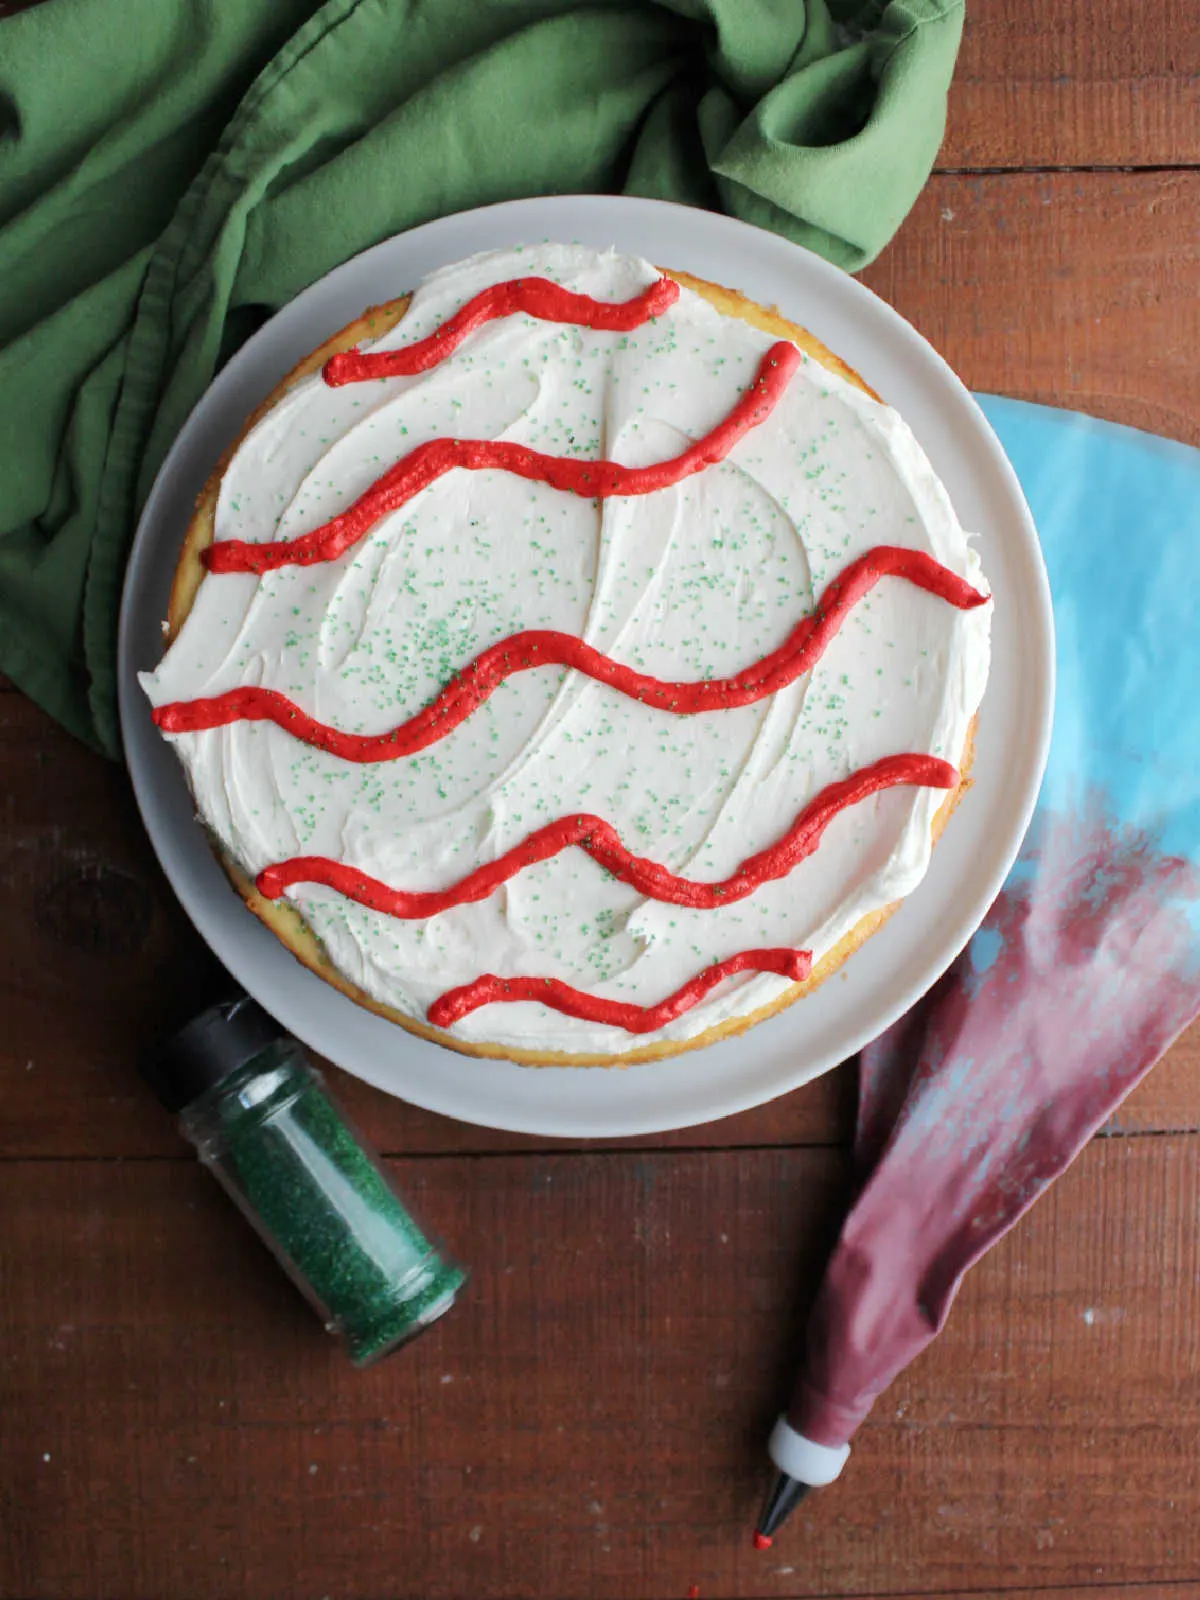 Decorated cheesecake next to piping bag with red frosting and bottle of green sanding sugar.